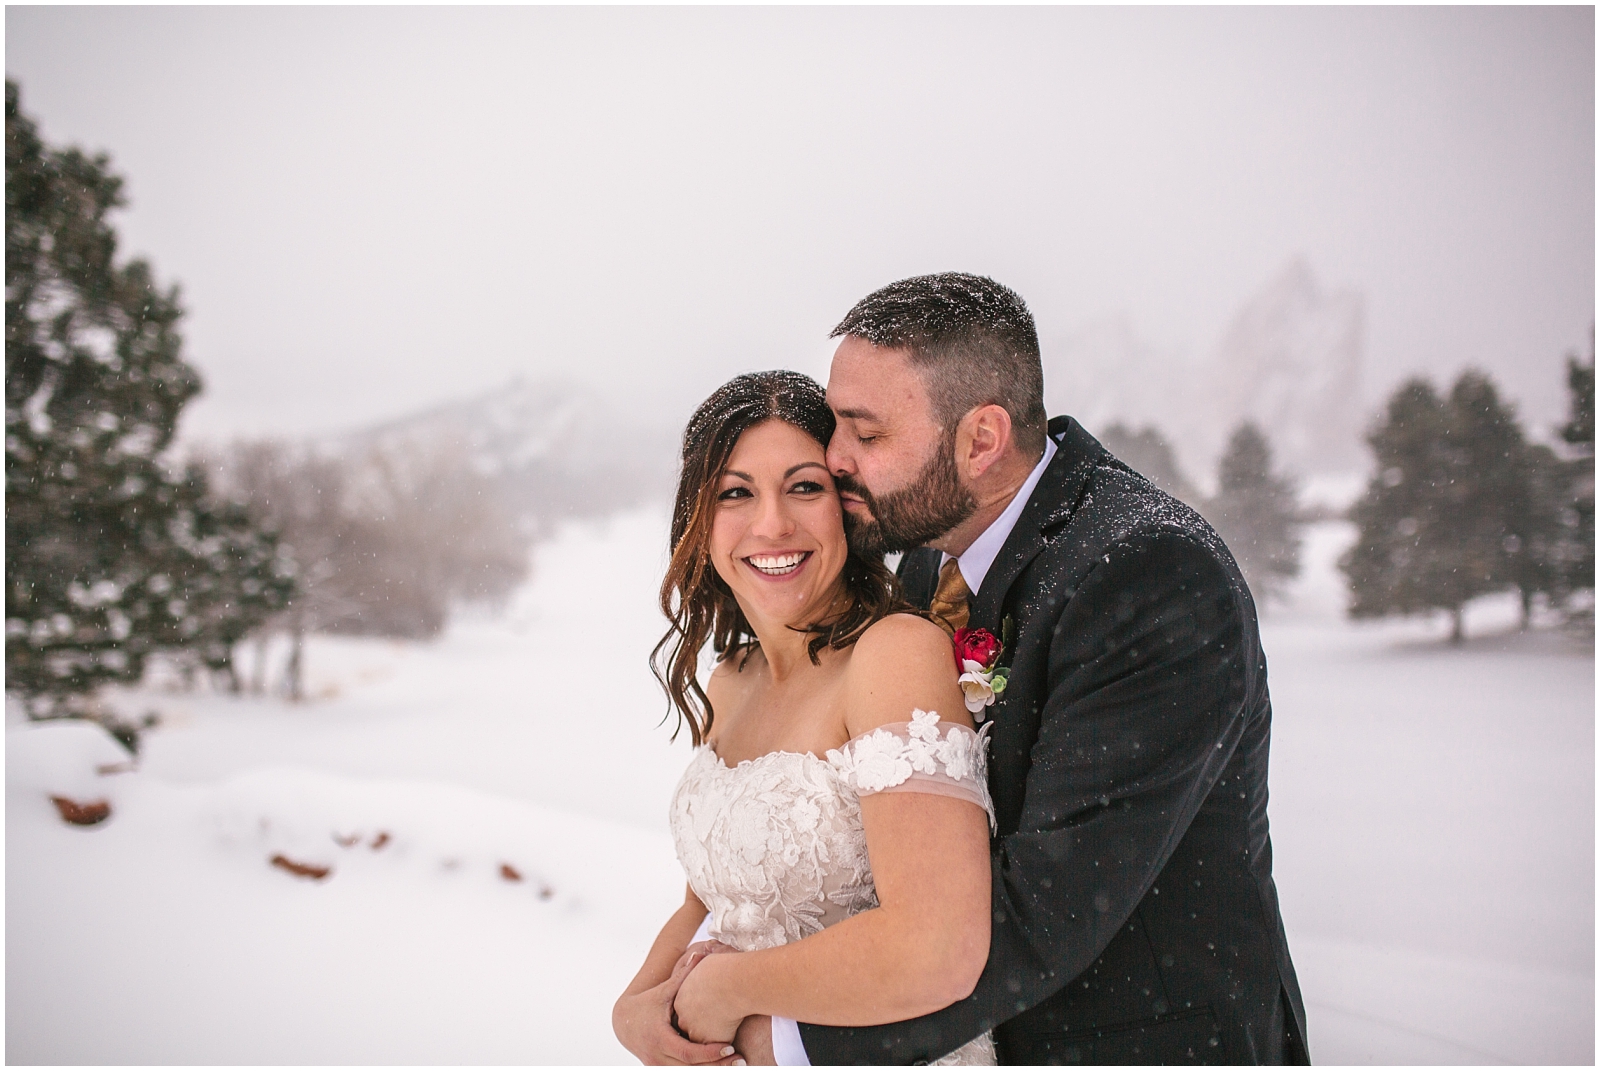 Bride and groom cuddling in the snow storm for their winter wedding at Arrowhead Golf Club